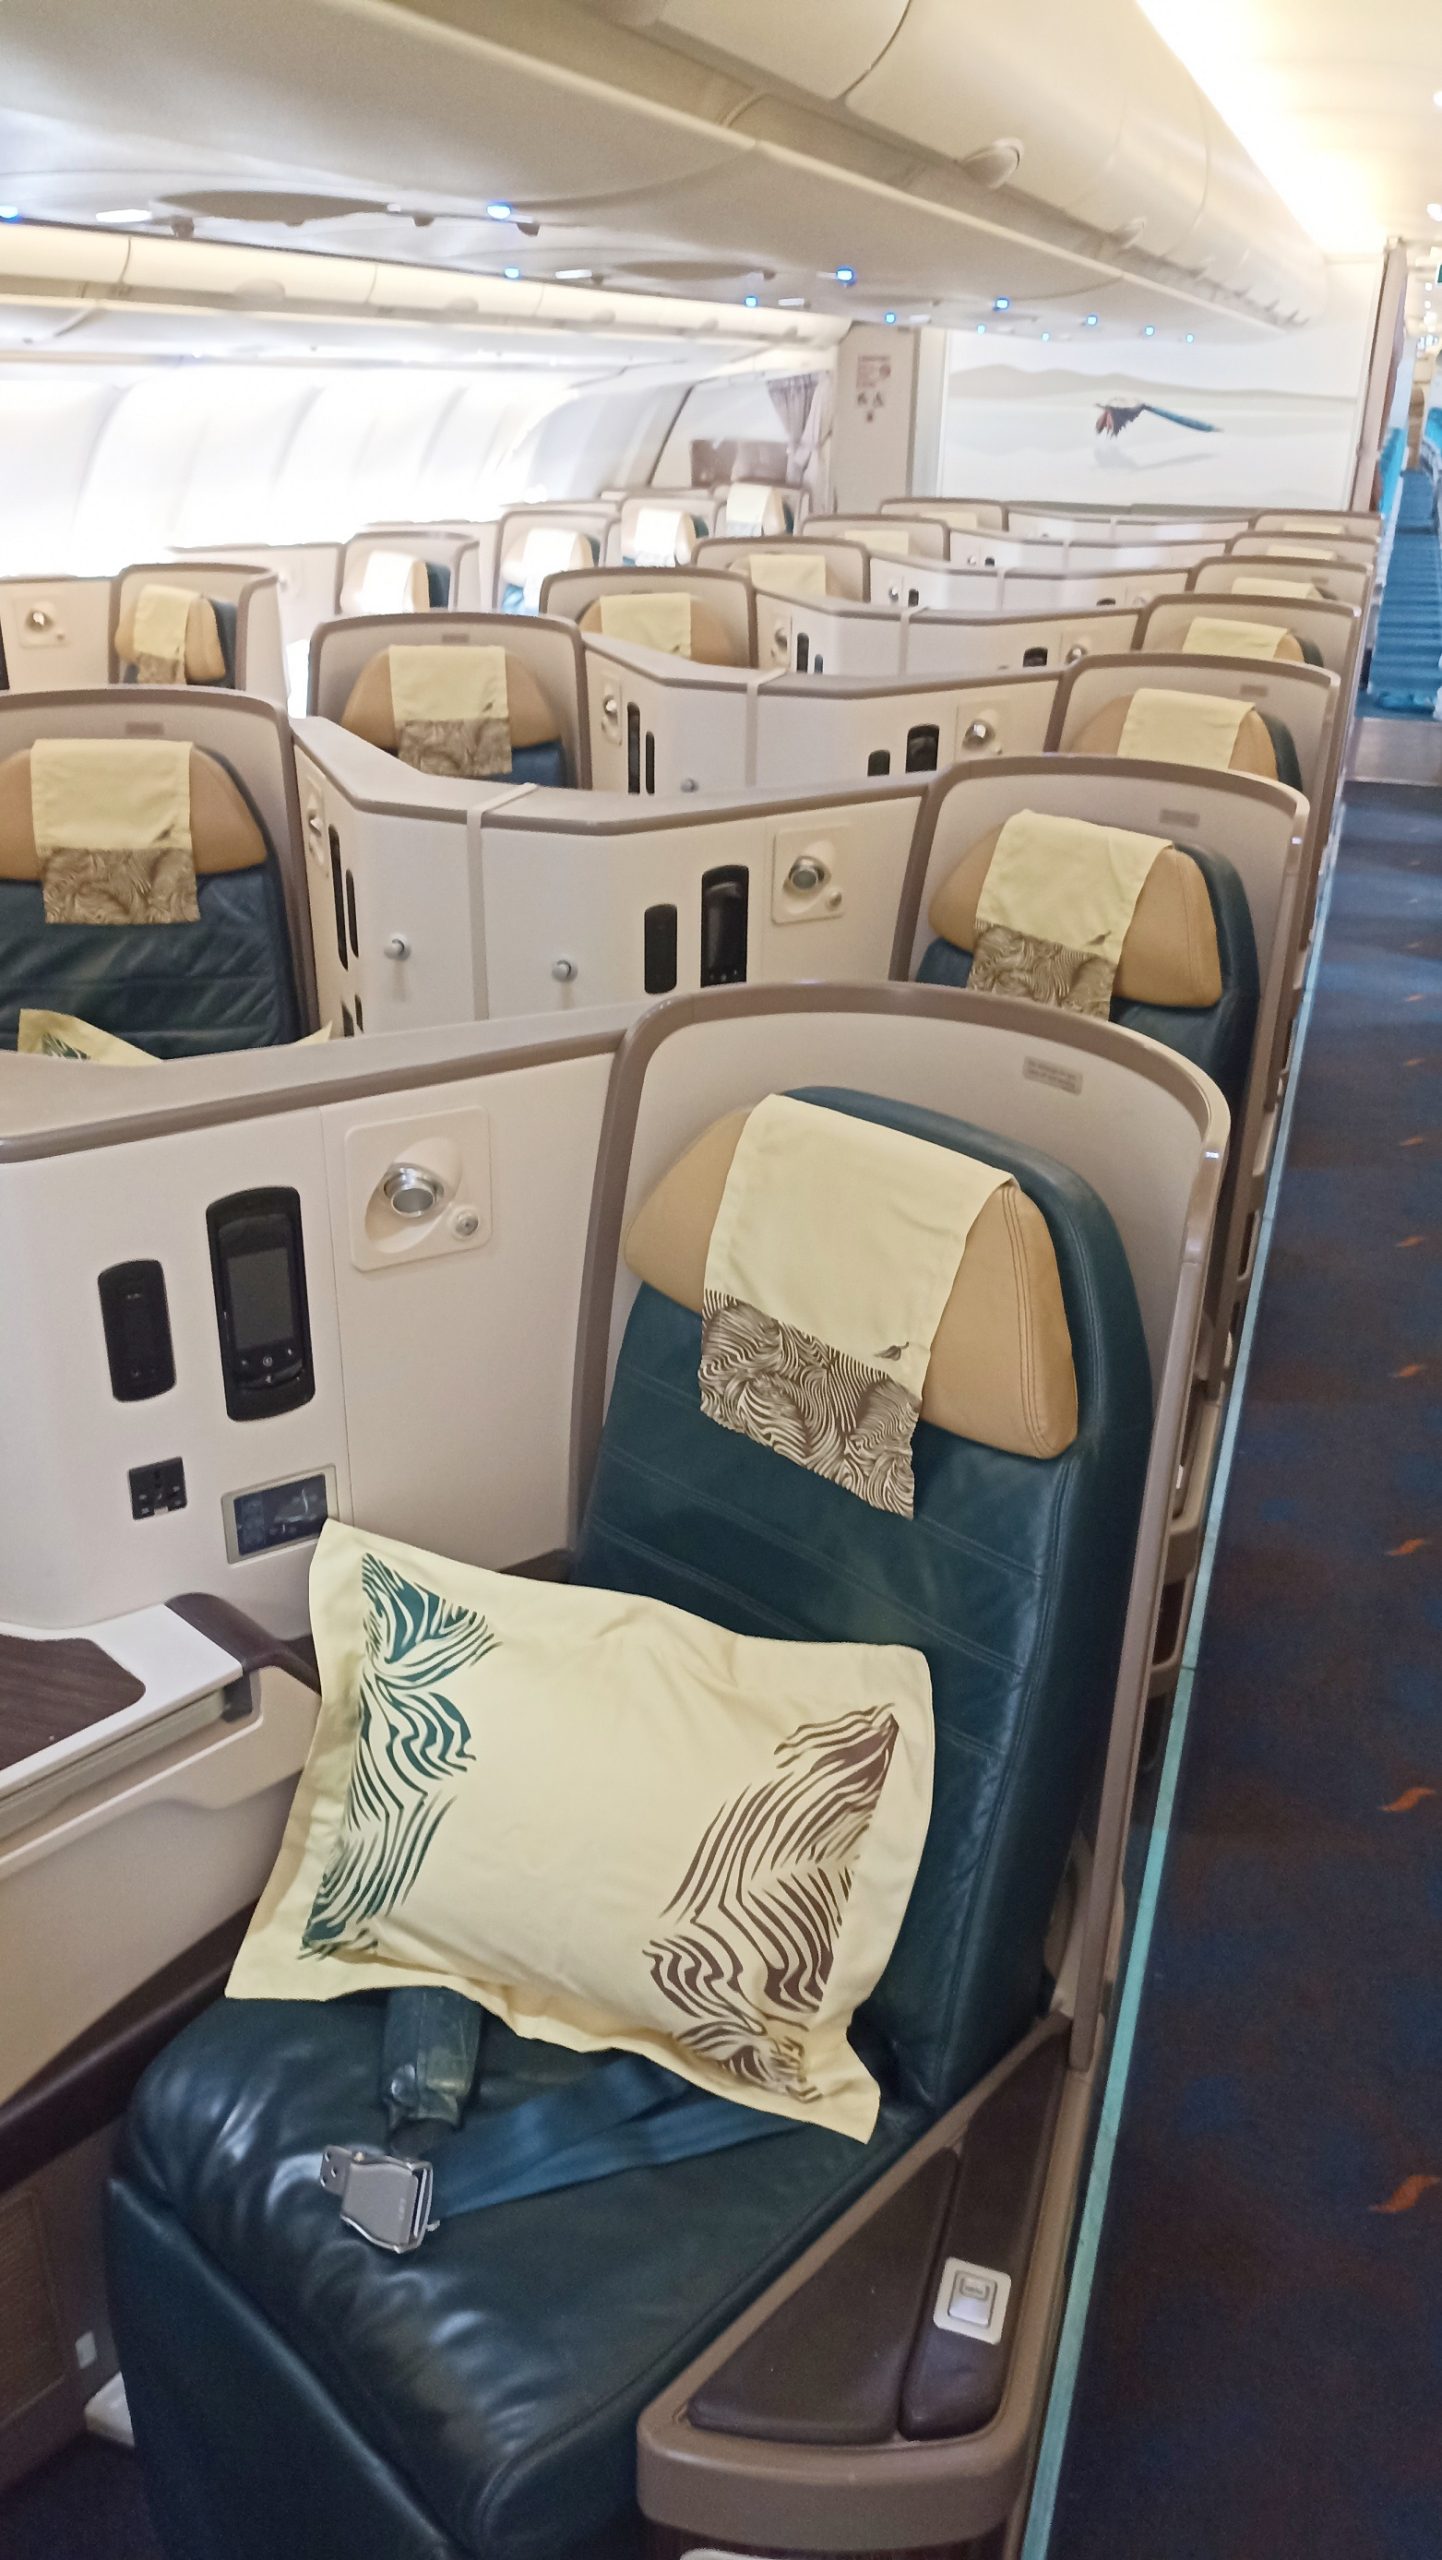 SriLankan Airlines introduces eco-friendly amenities in Business Class